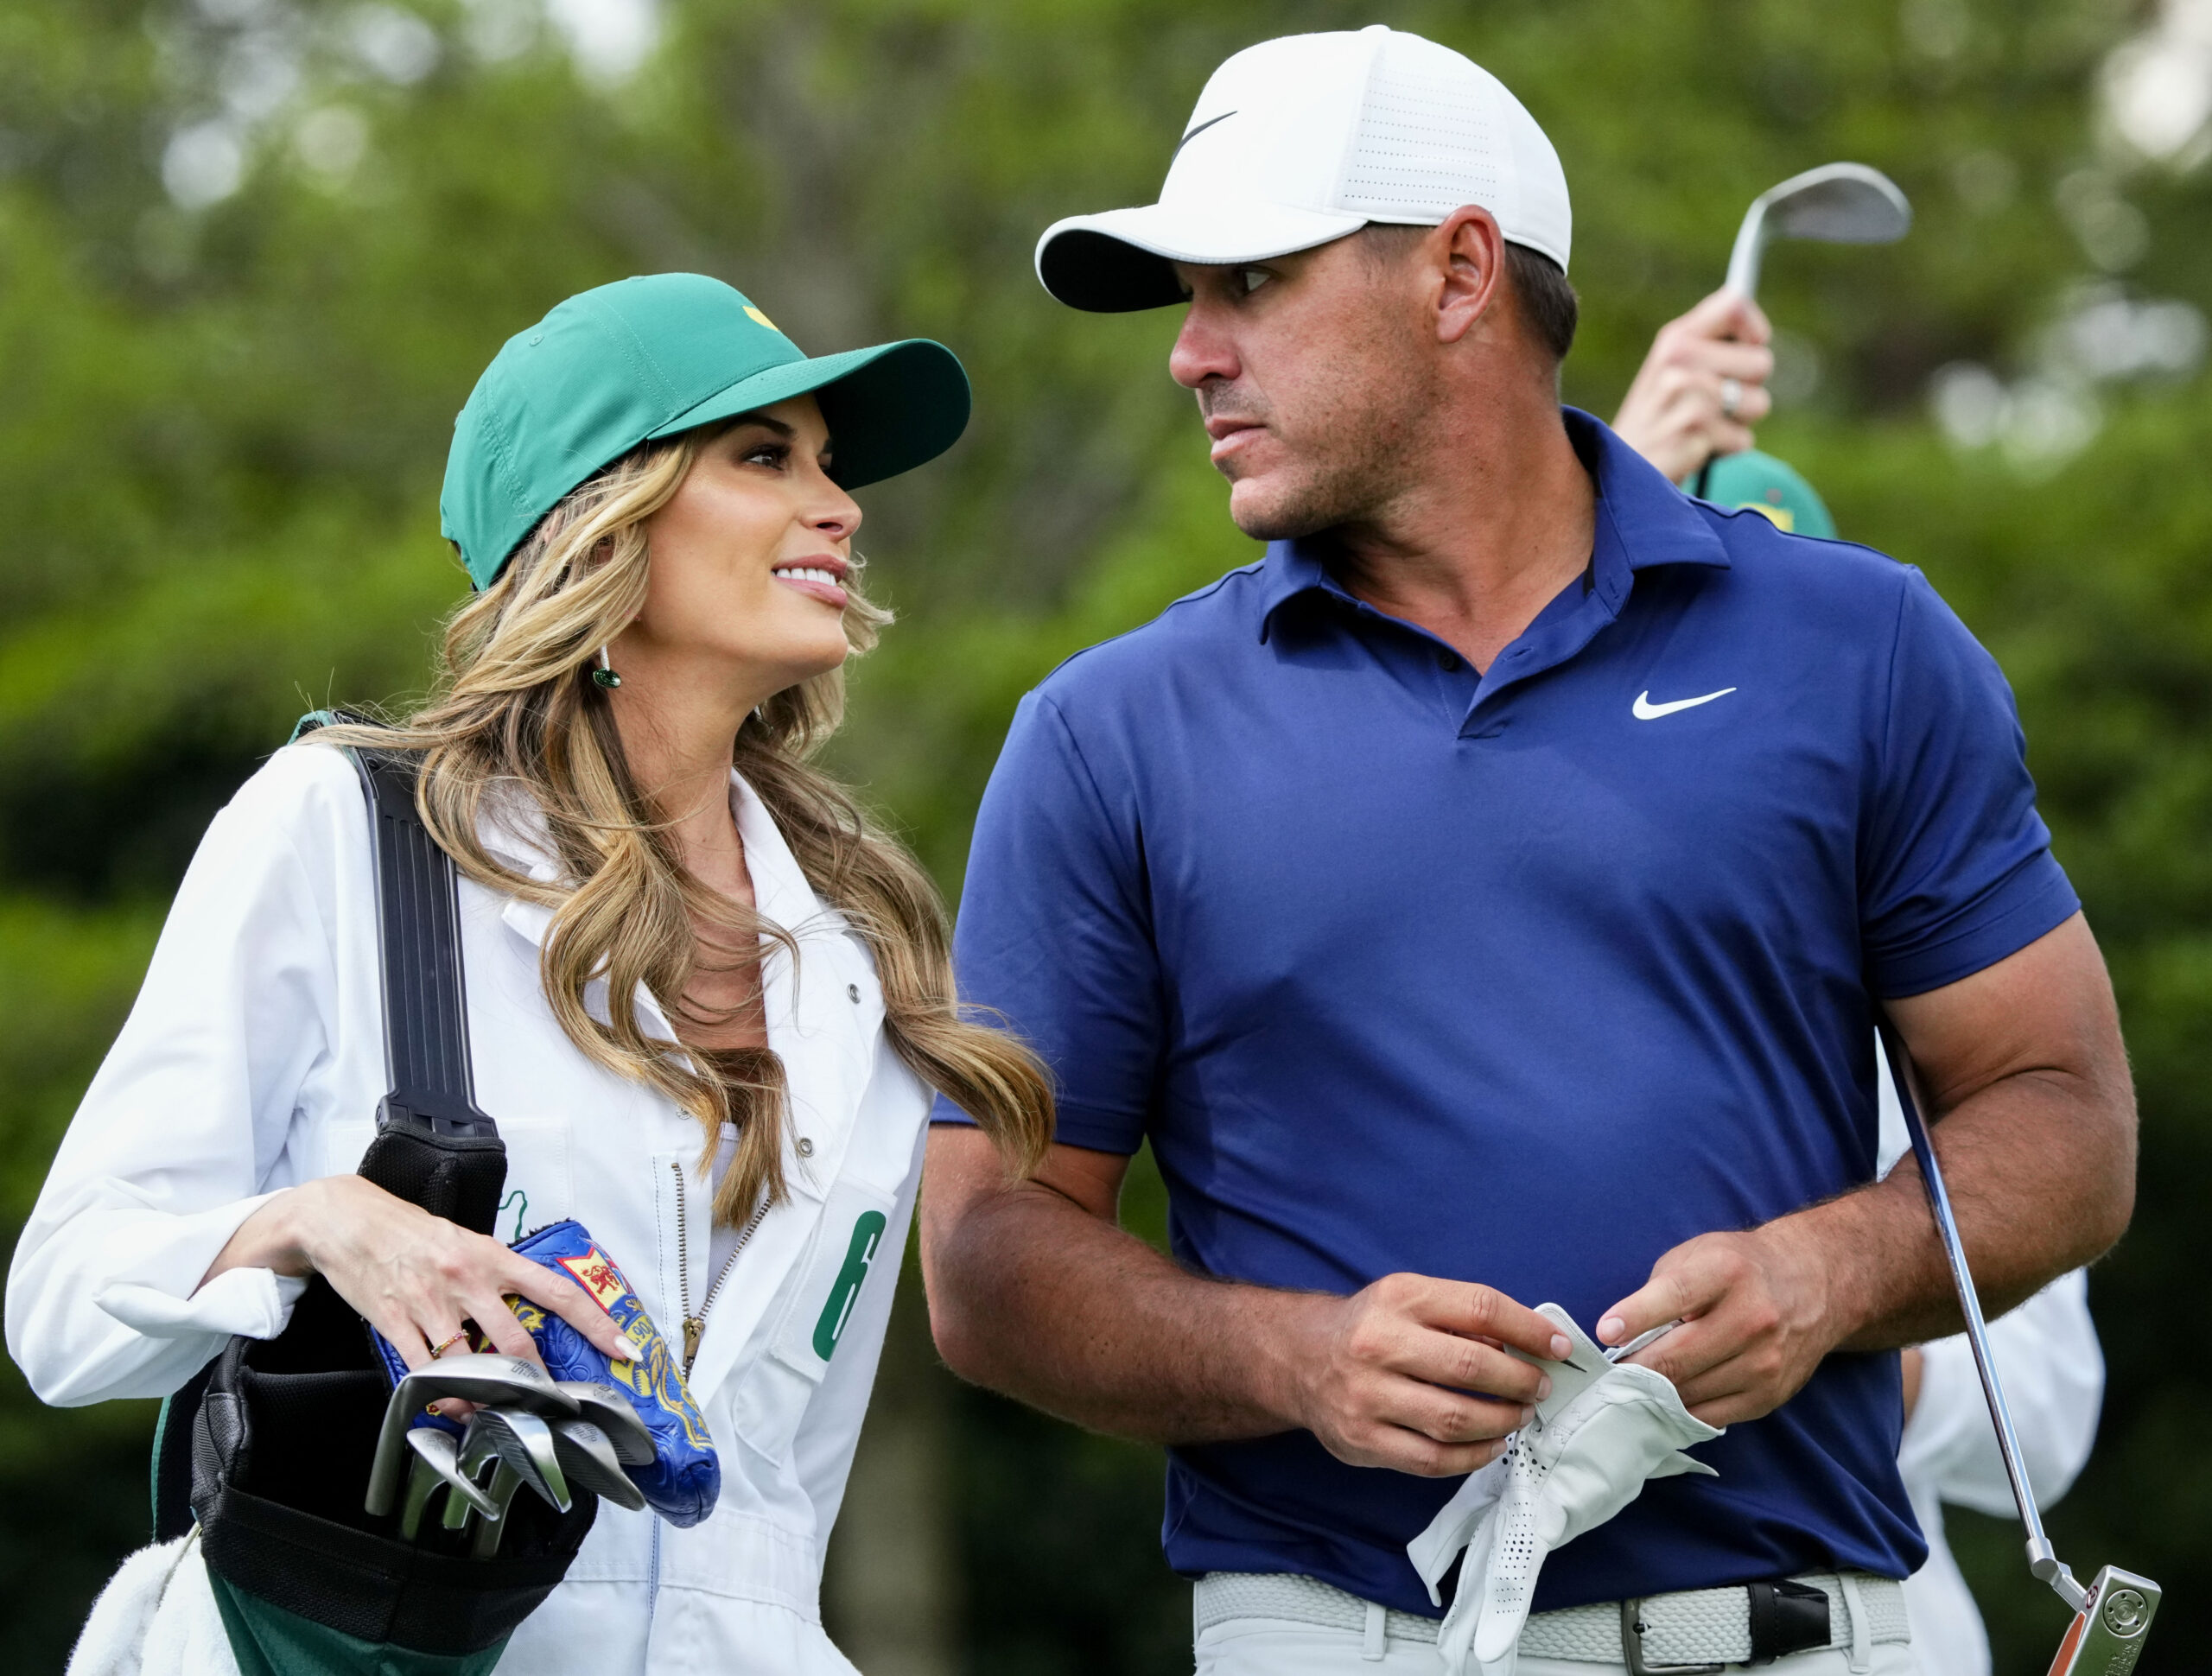 Five things to know about Jena Sims Koepka as her husband Brooks Koepka chased his first Masters win